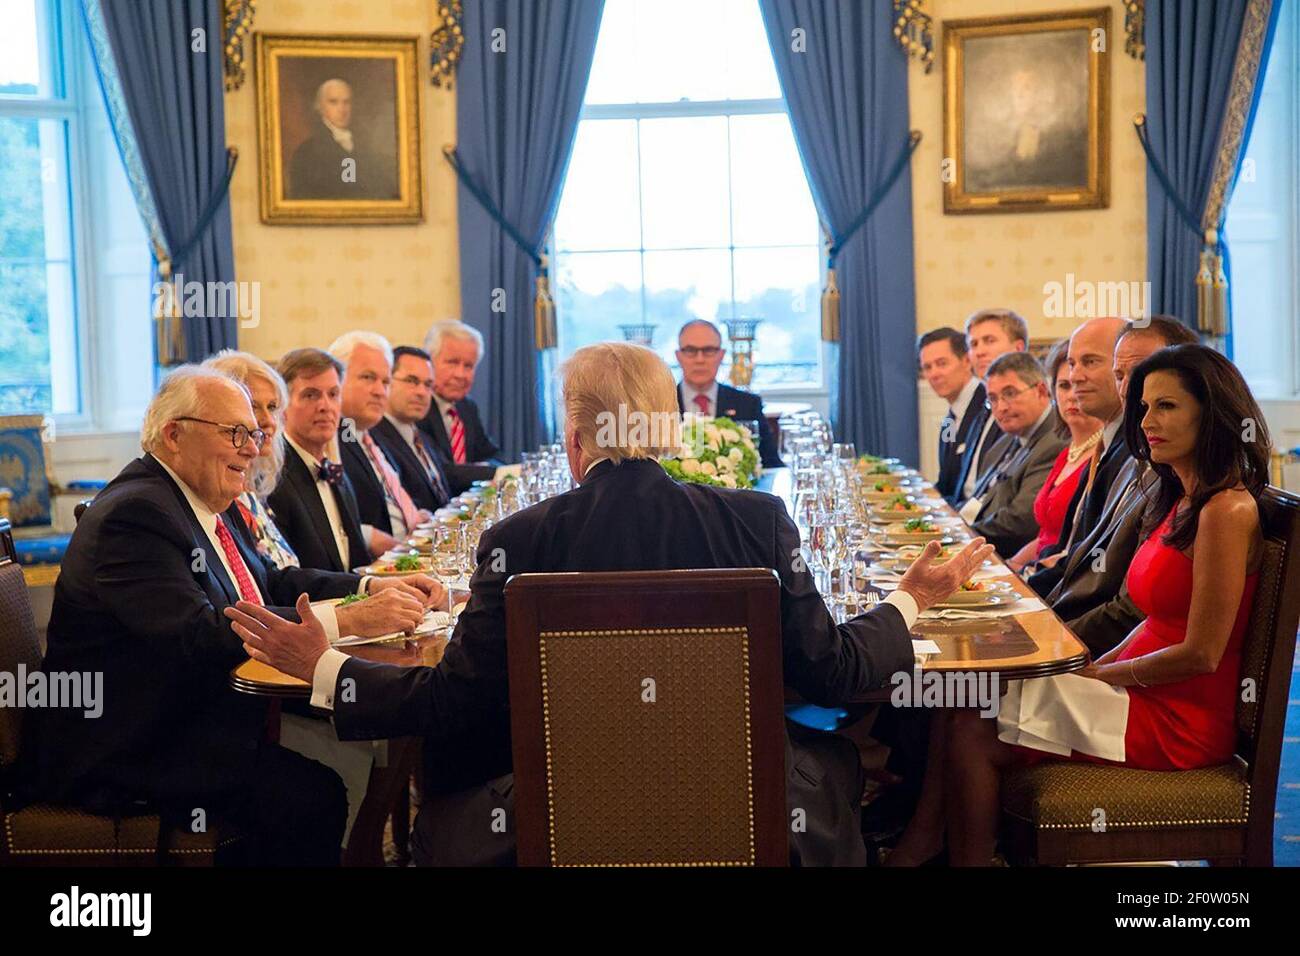 President Donald Trump hosts a dinner Monday evening September 25 2017 in the Blue Room at the White House in Washington D.C. with grassroots leaders Penny Nance CEO of Concerned Women for America; Tim Phillips president of the Americans for Prosperity; Matt Schlapp chairman of the American Conservative Union; Leonard Leo executive vice president of the The Federalist Society; Ralph Reed chairman of the Faith & Freedom Coalition; Marjorie Dannenfelser President of the Susan B. Anthony List; Ed Feulner Founder and Acting President of The Heritage Foundation; Tim Goeglein vice president of exter Stock Photo